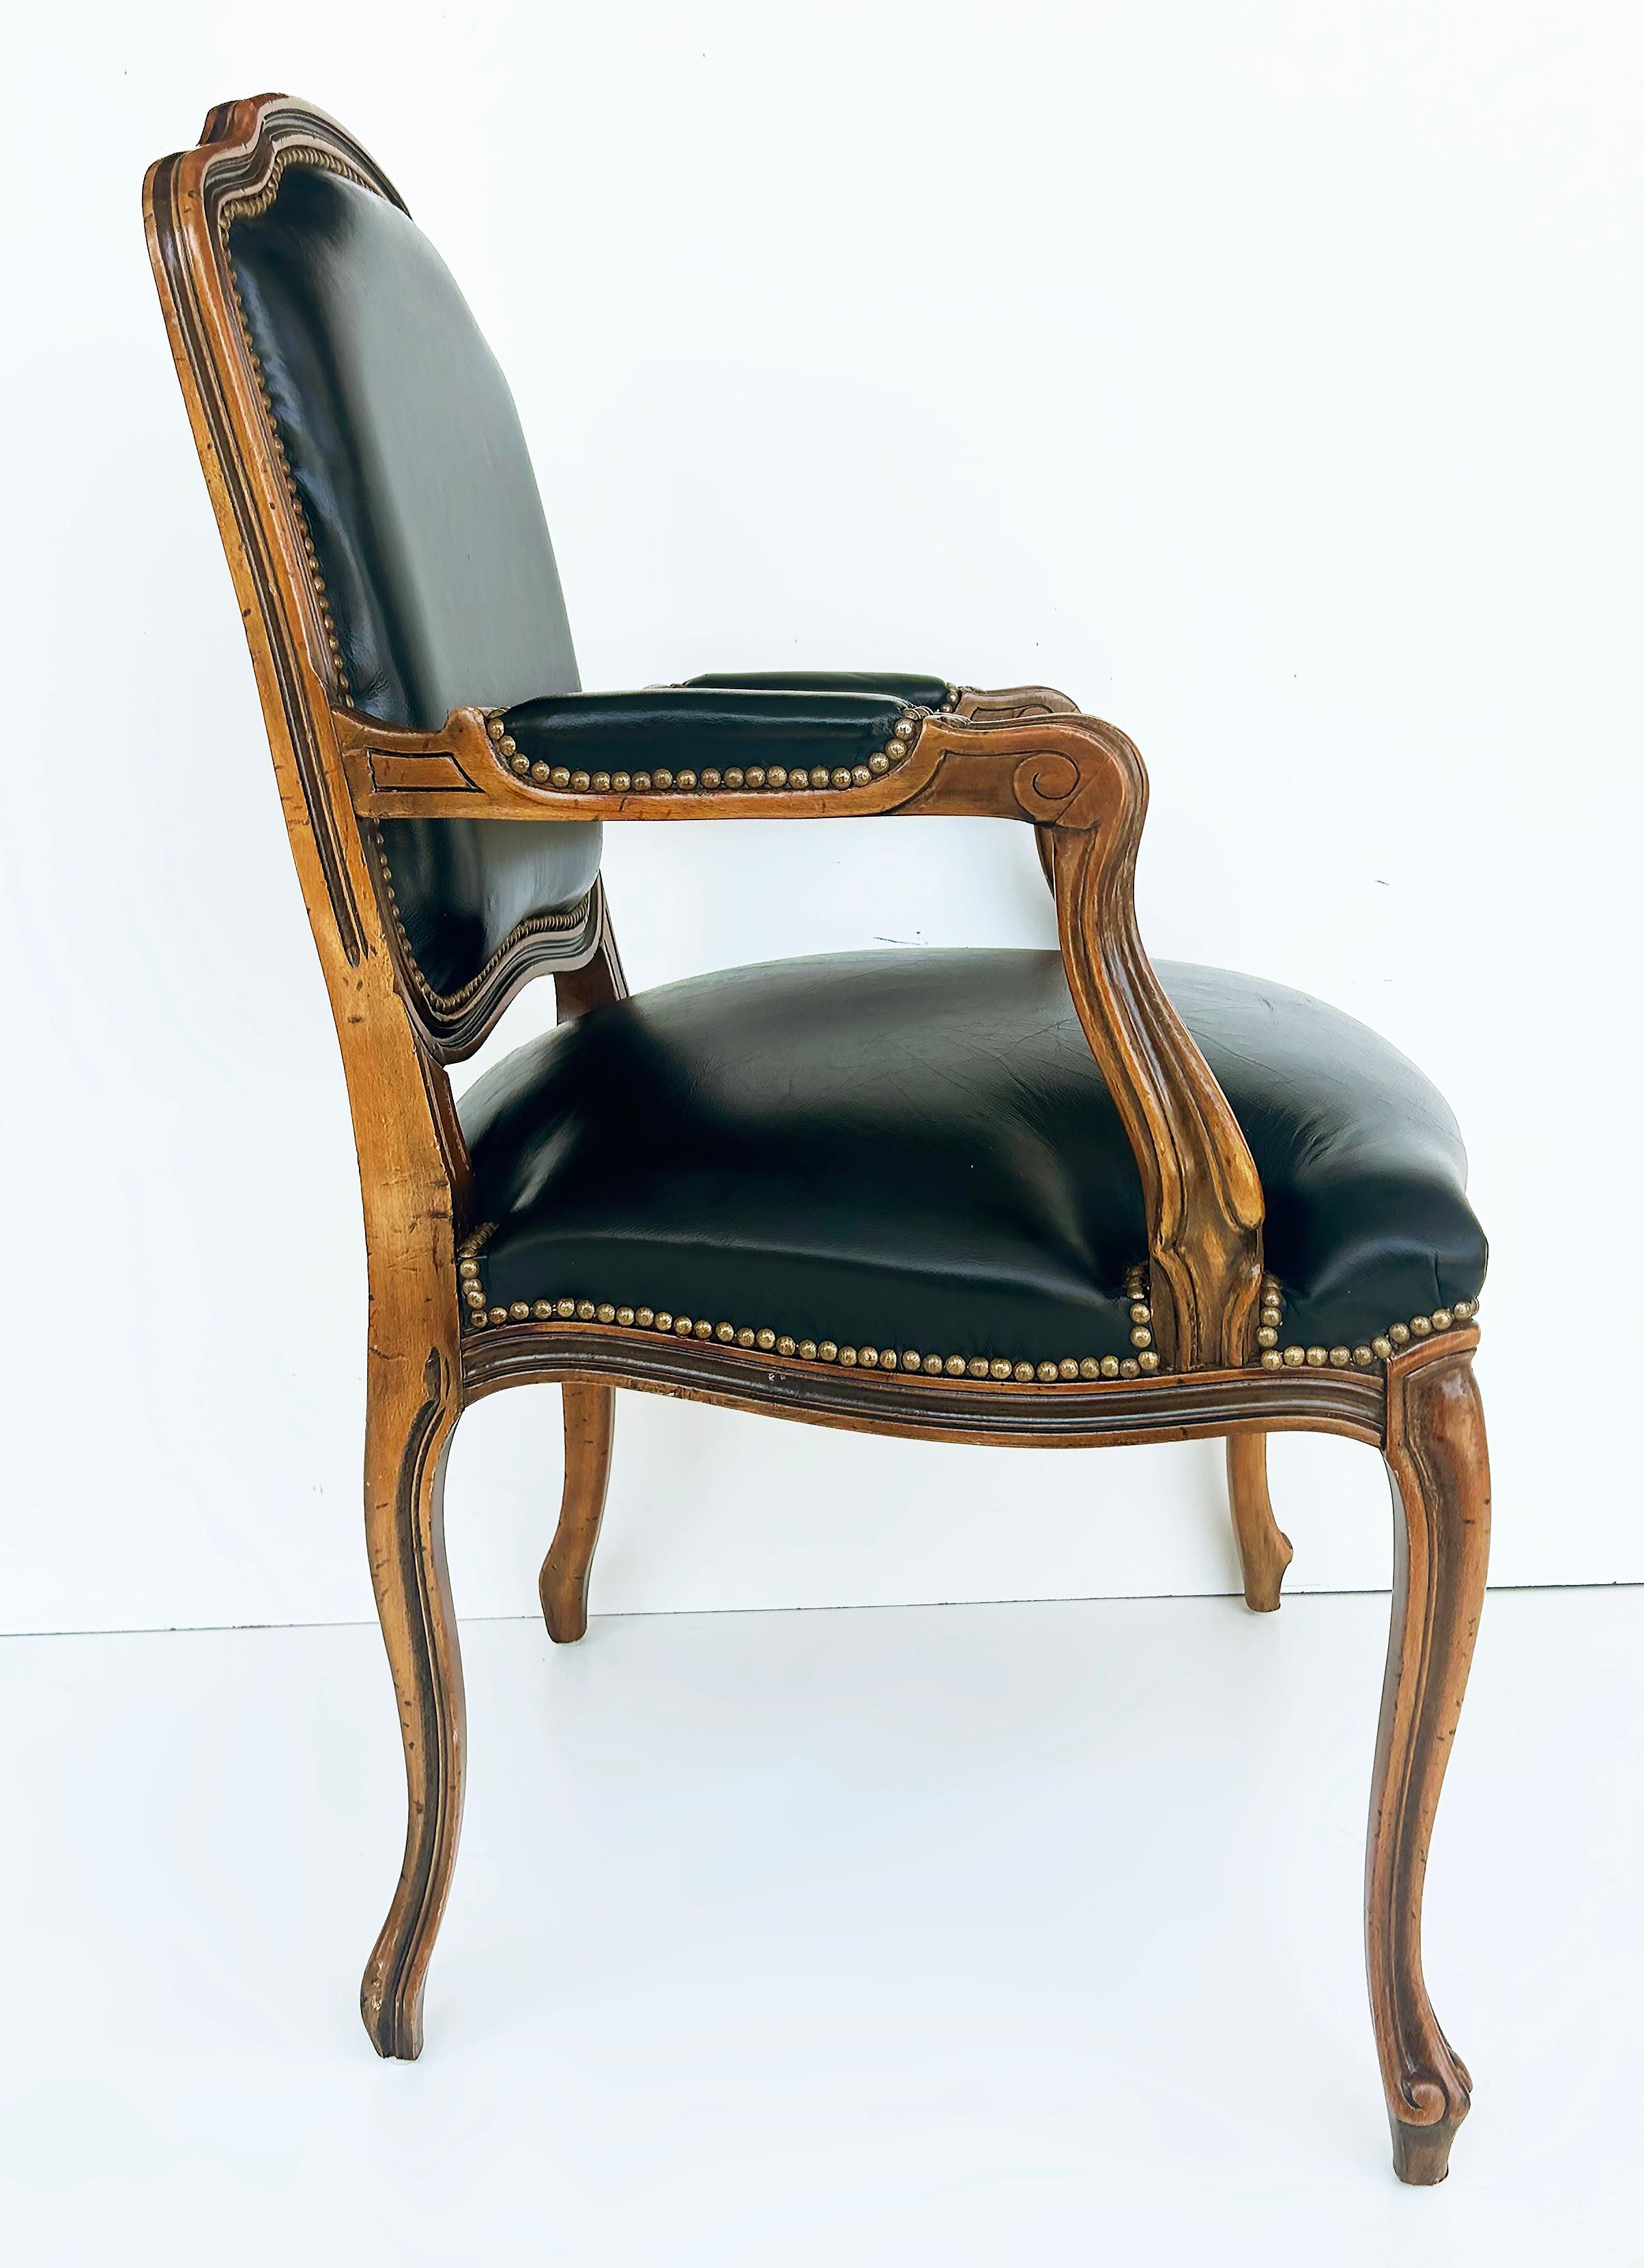 Vintage Italian Chateau D'Ax Leather Armchairs with Brass Nailhead Details, Pair In Good Condition For Sale In Miami, FL